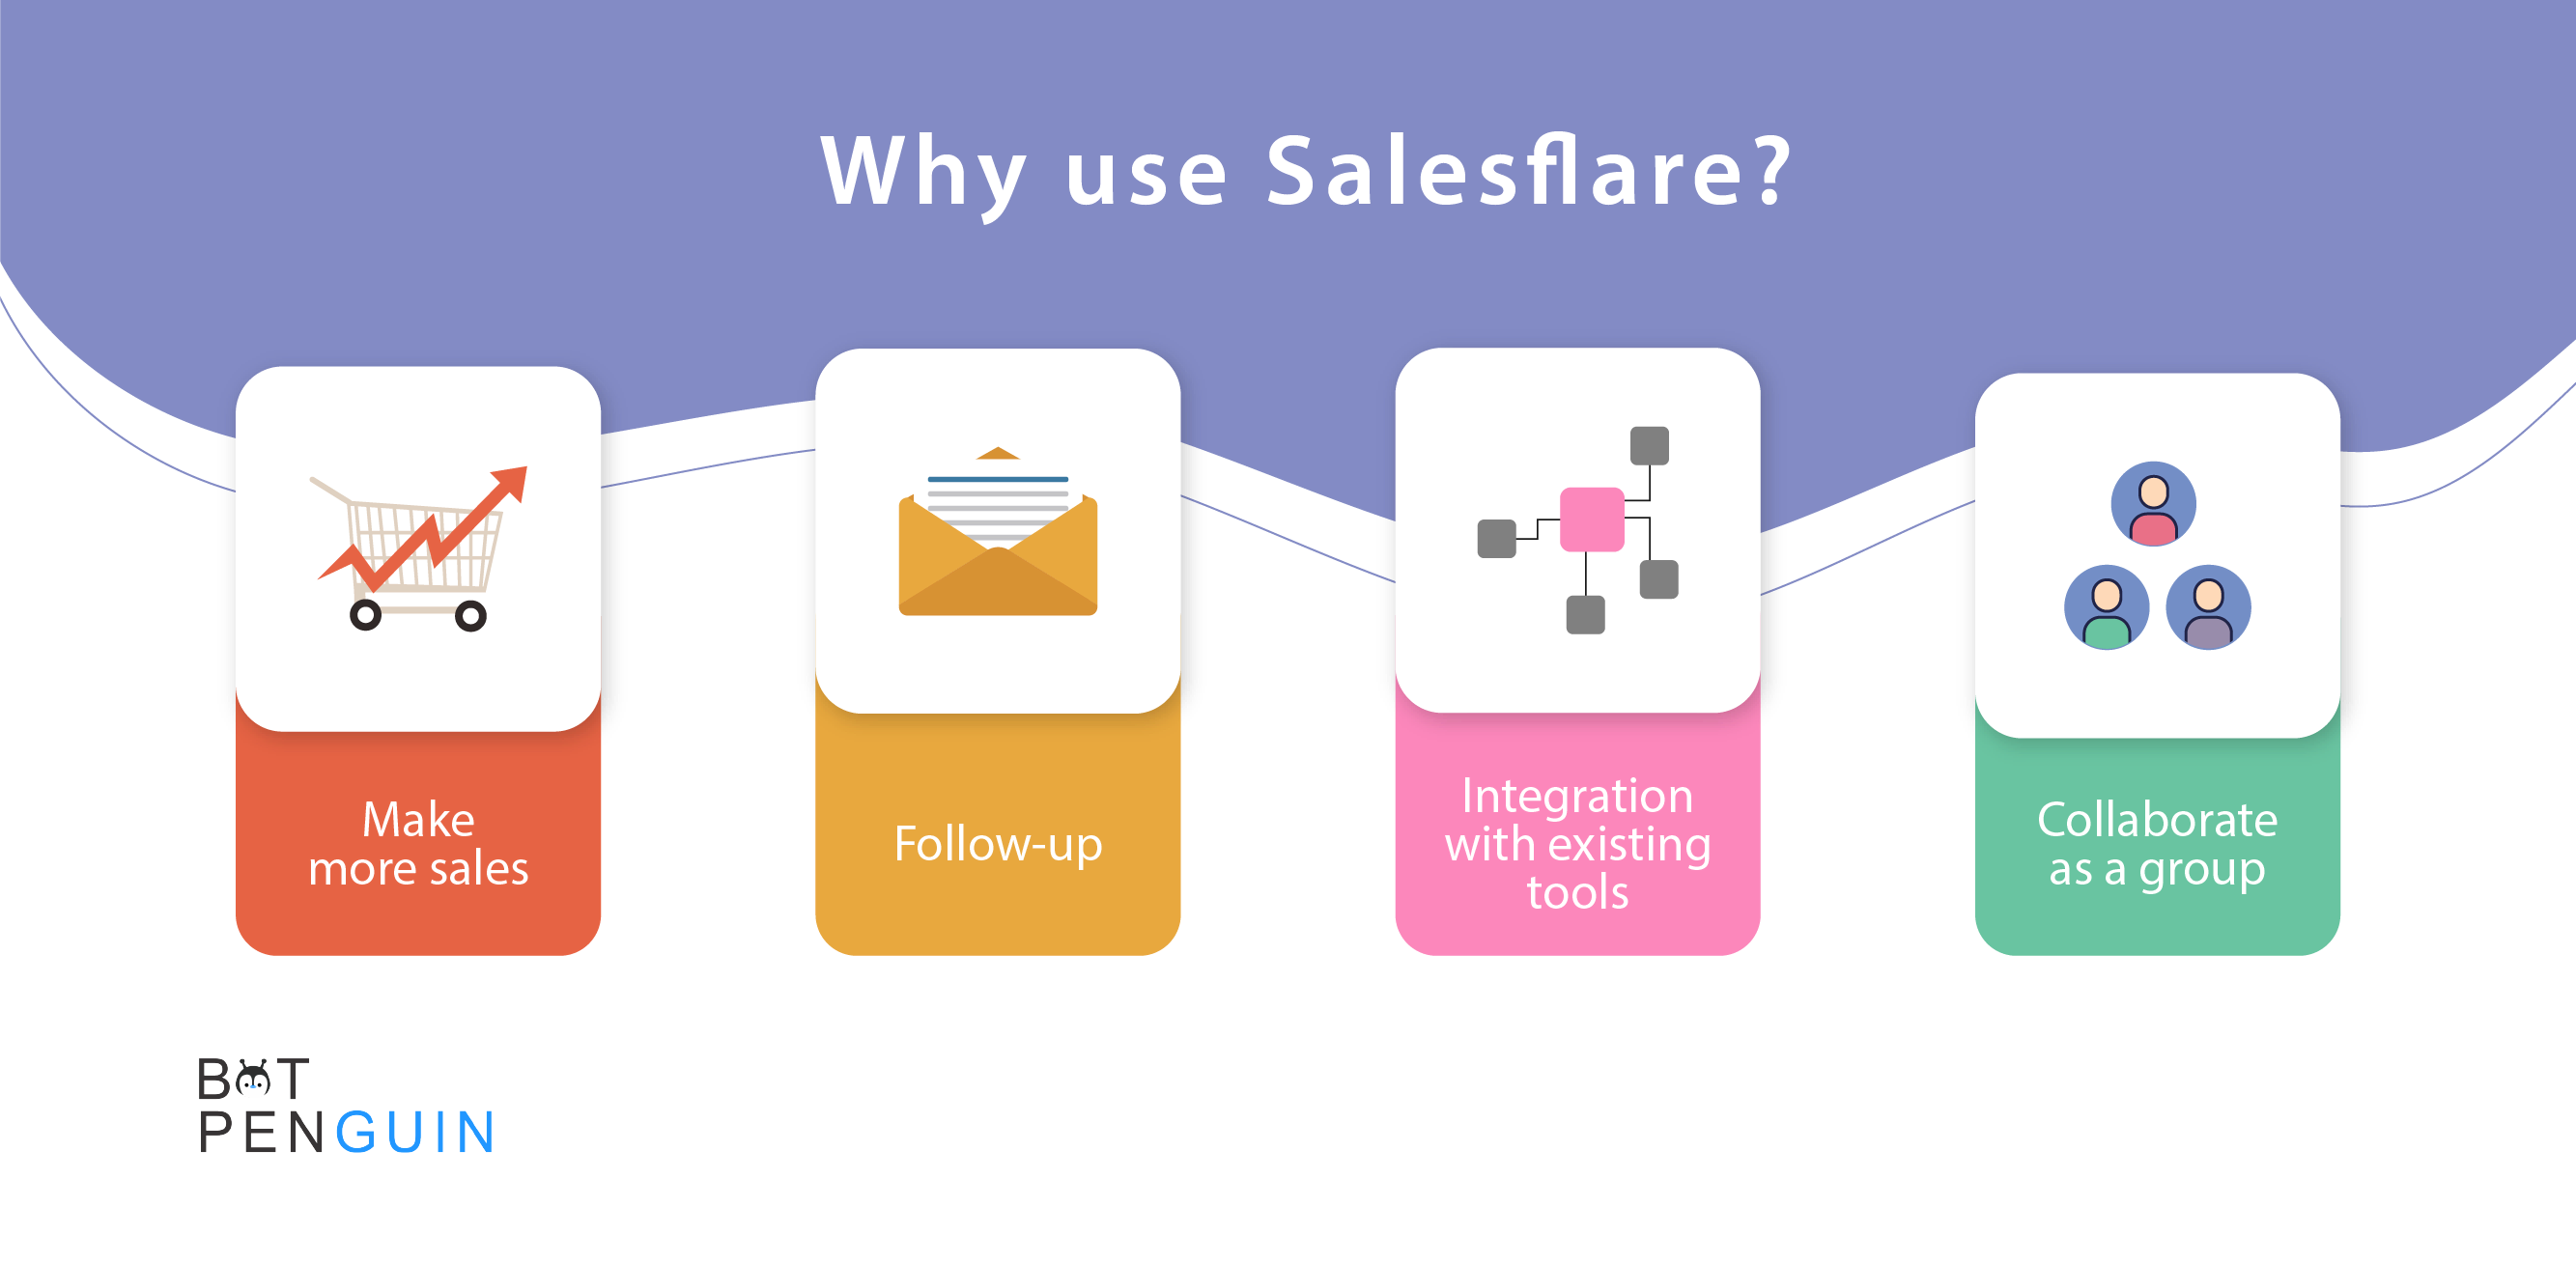 Why use Salesflare?